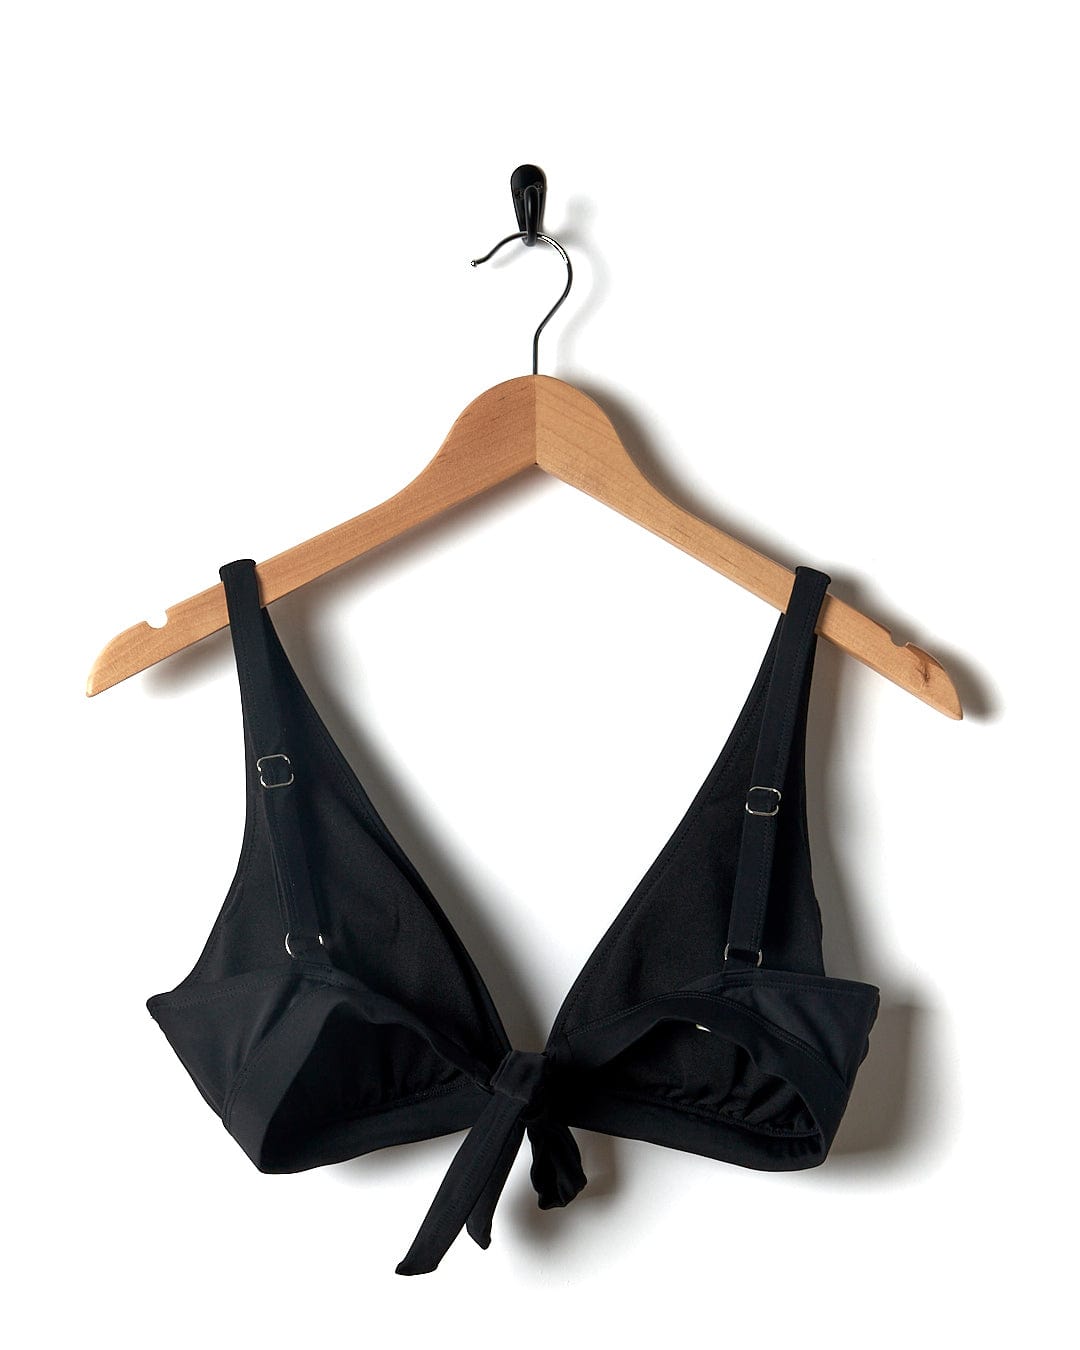 A Rosie - Womens Bikini Top - Black with adjustable straps hanging on a hanger.